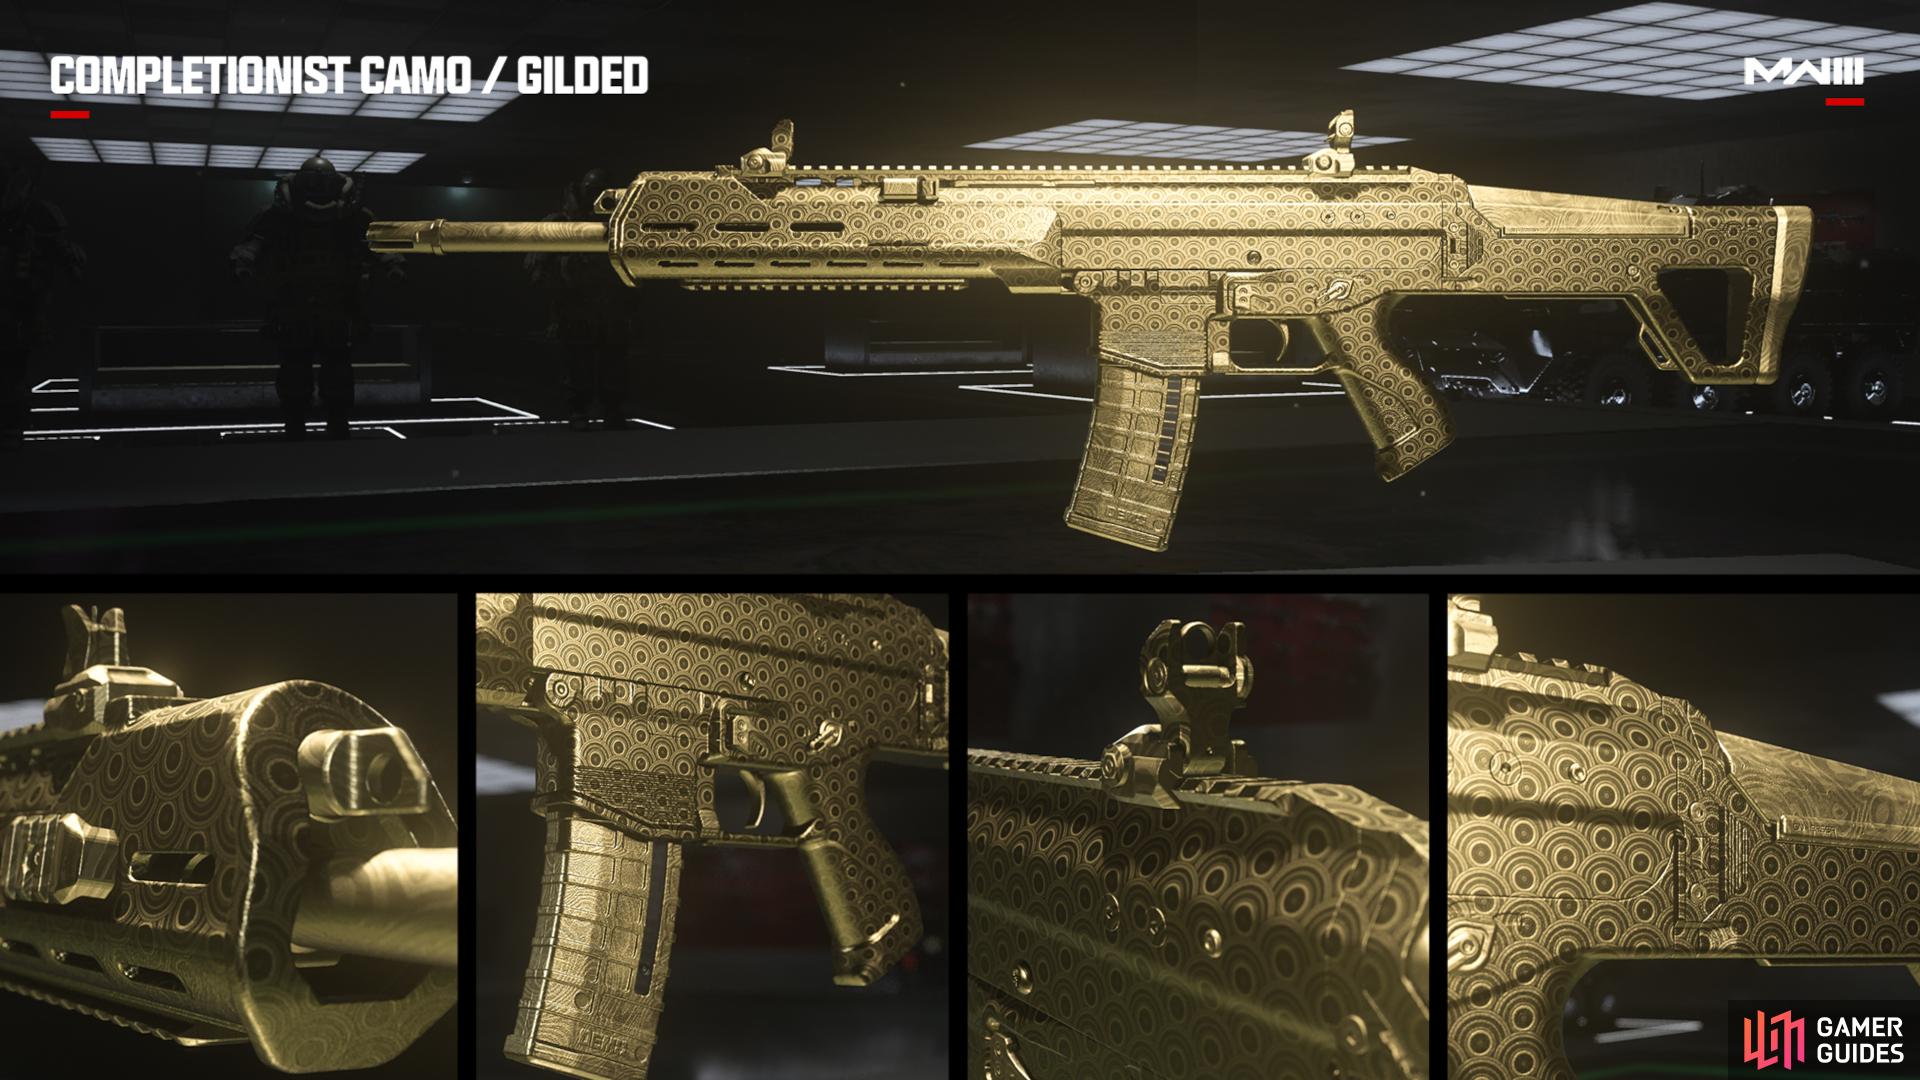 Gilded is a new patterned take on traditional Gold Camo. Image via Activision.